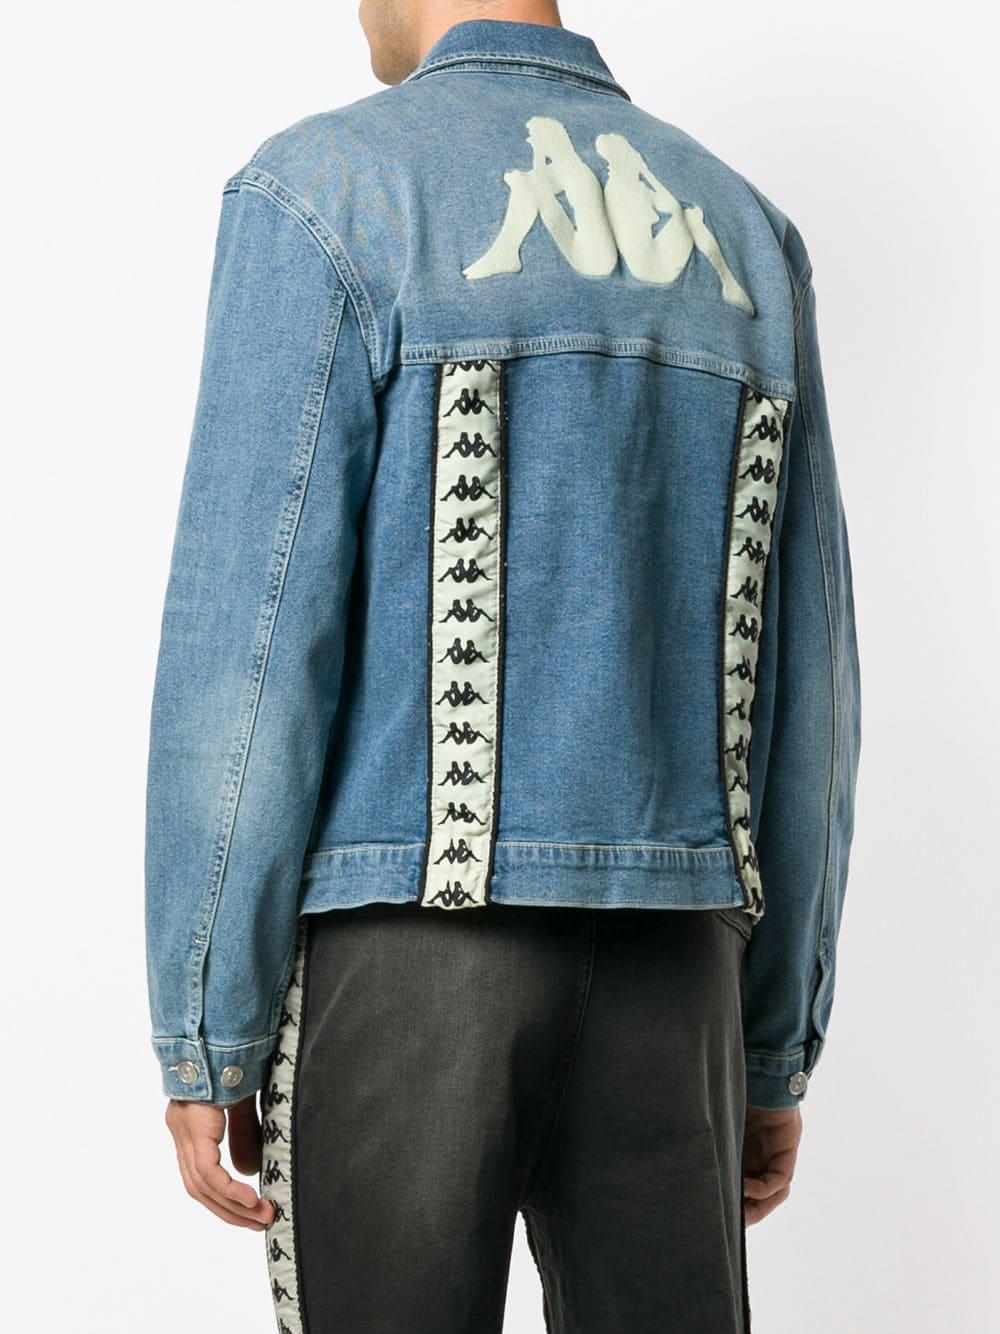 Kappa Synthetic Classic Denim Jacket in Blue for Men - Lyst